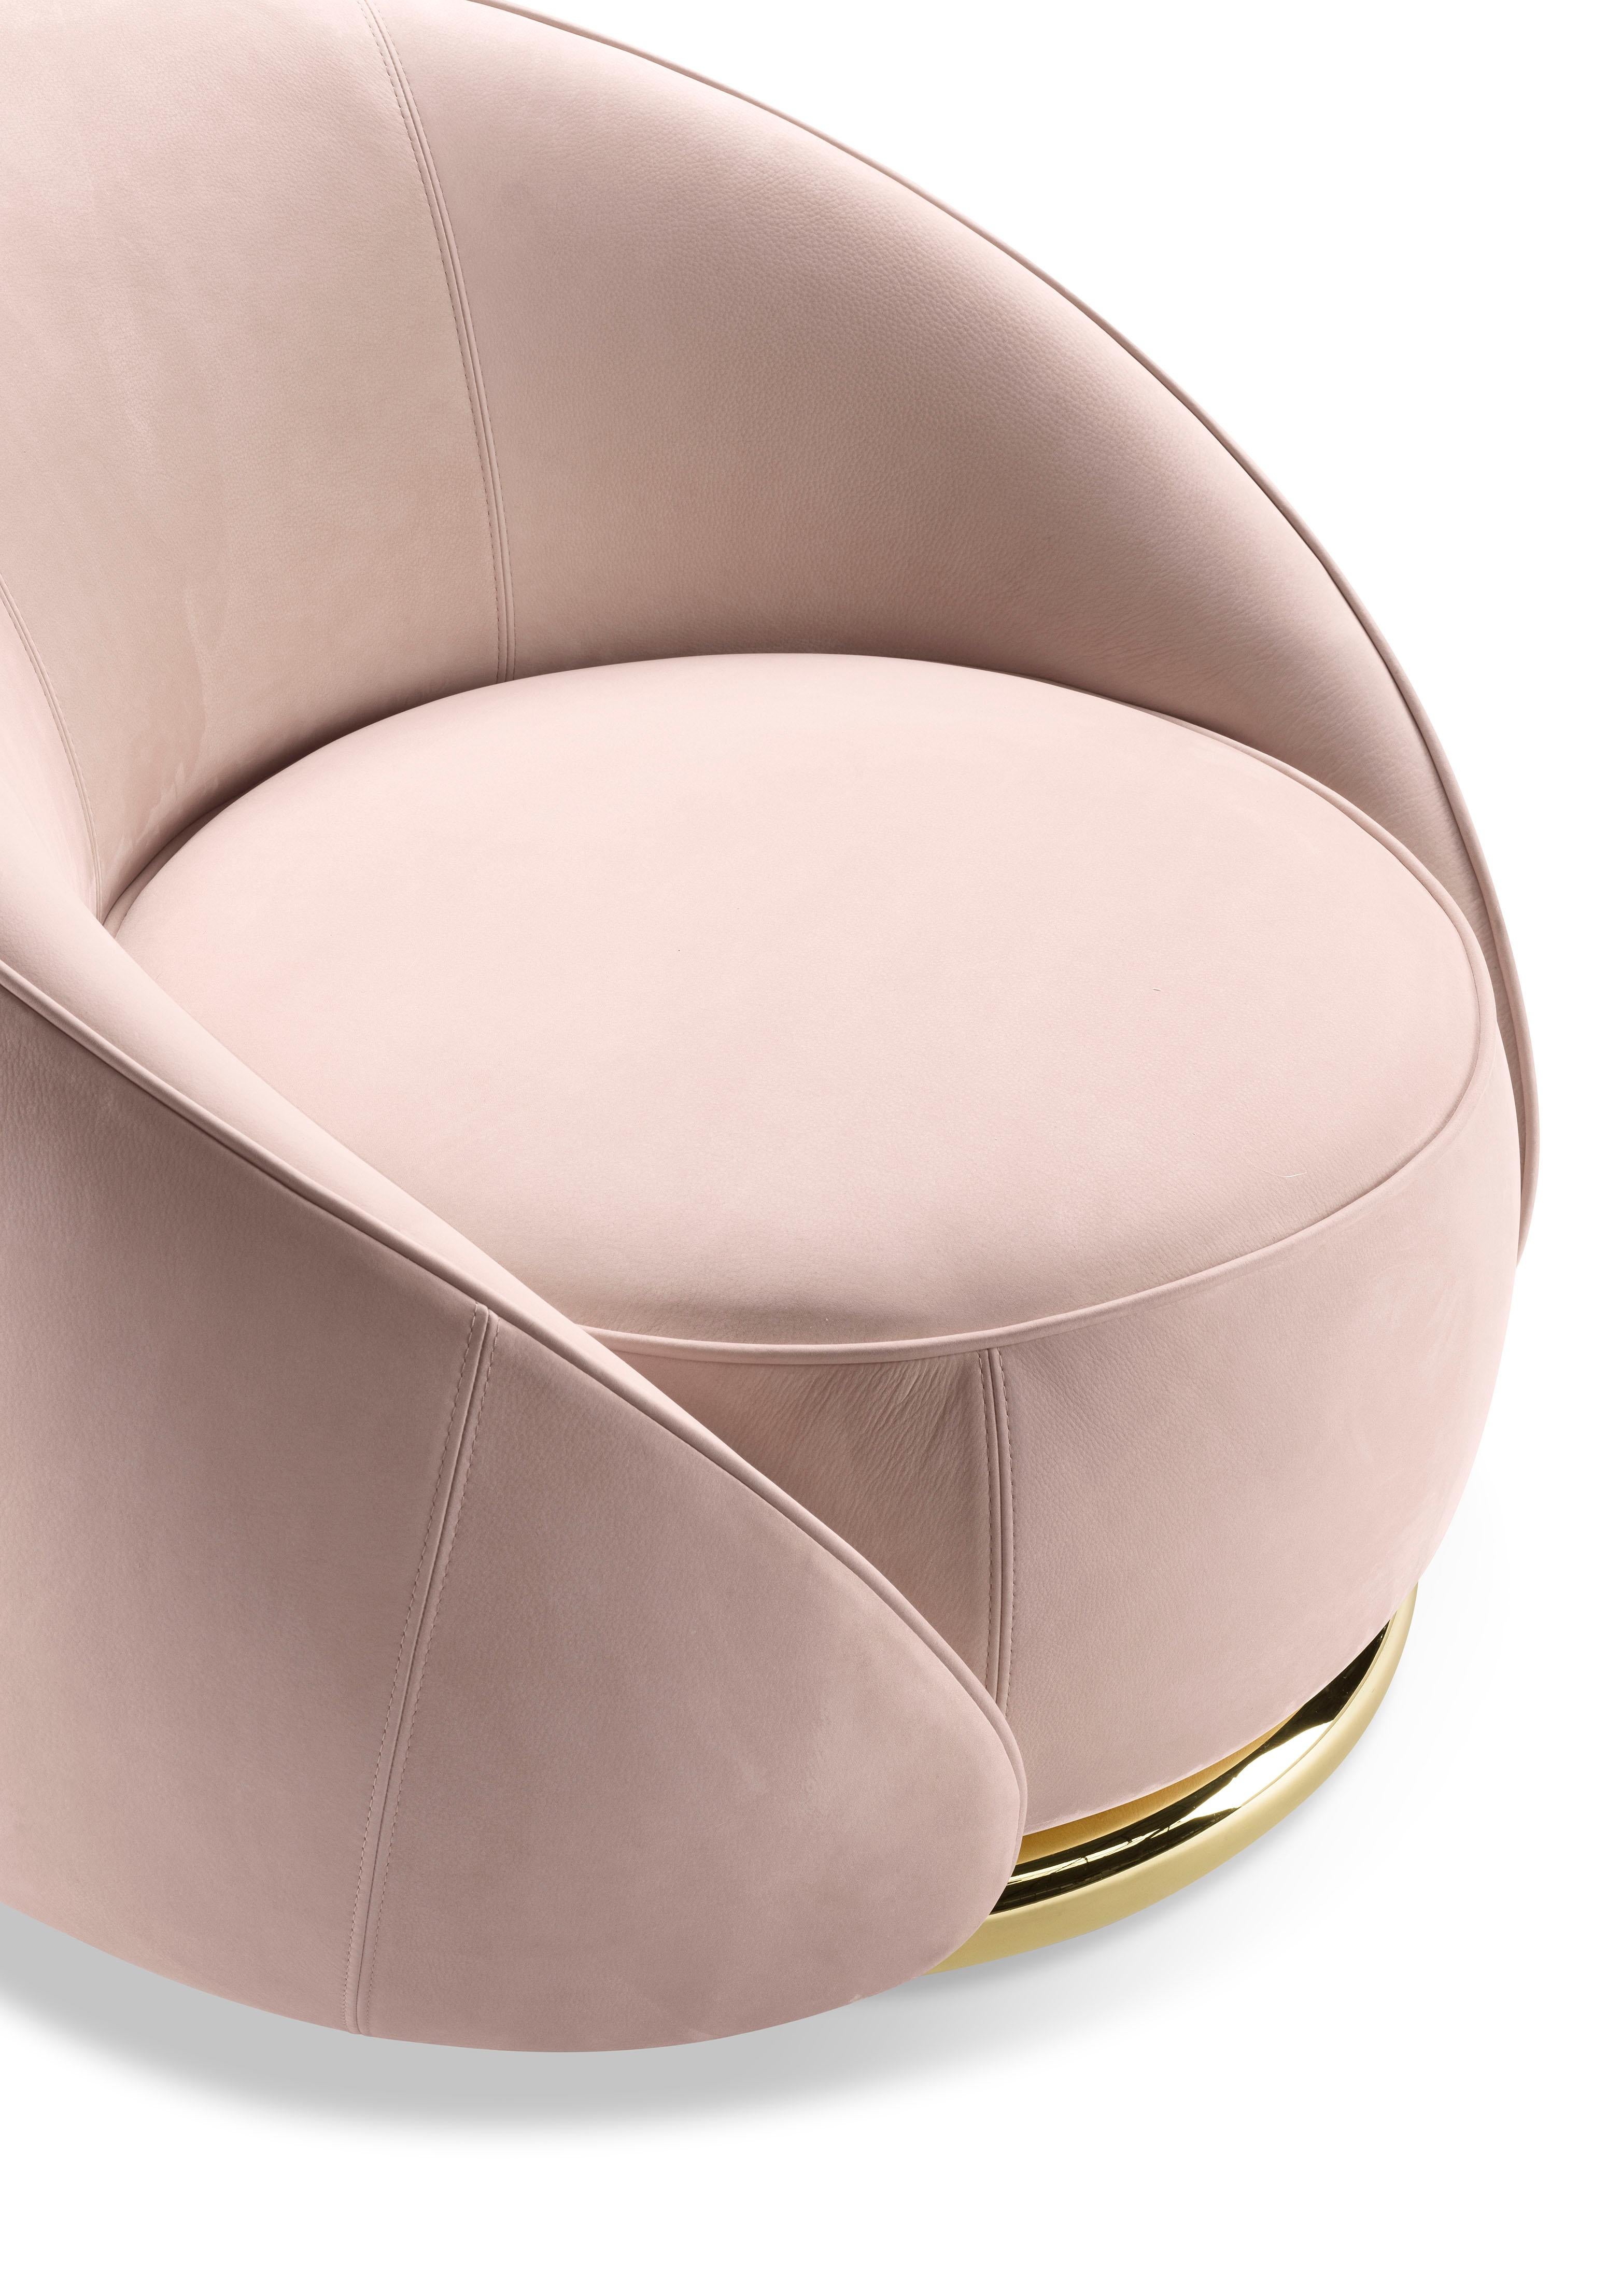 Abbracci Armchair in Cream Leather with Brown Burnished Brass Legs In Excellent Condition For Sale In Brooklyn, NY